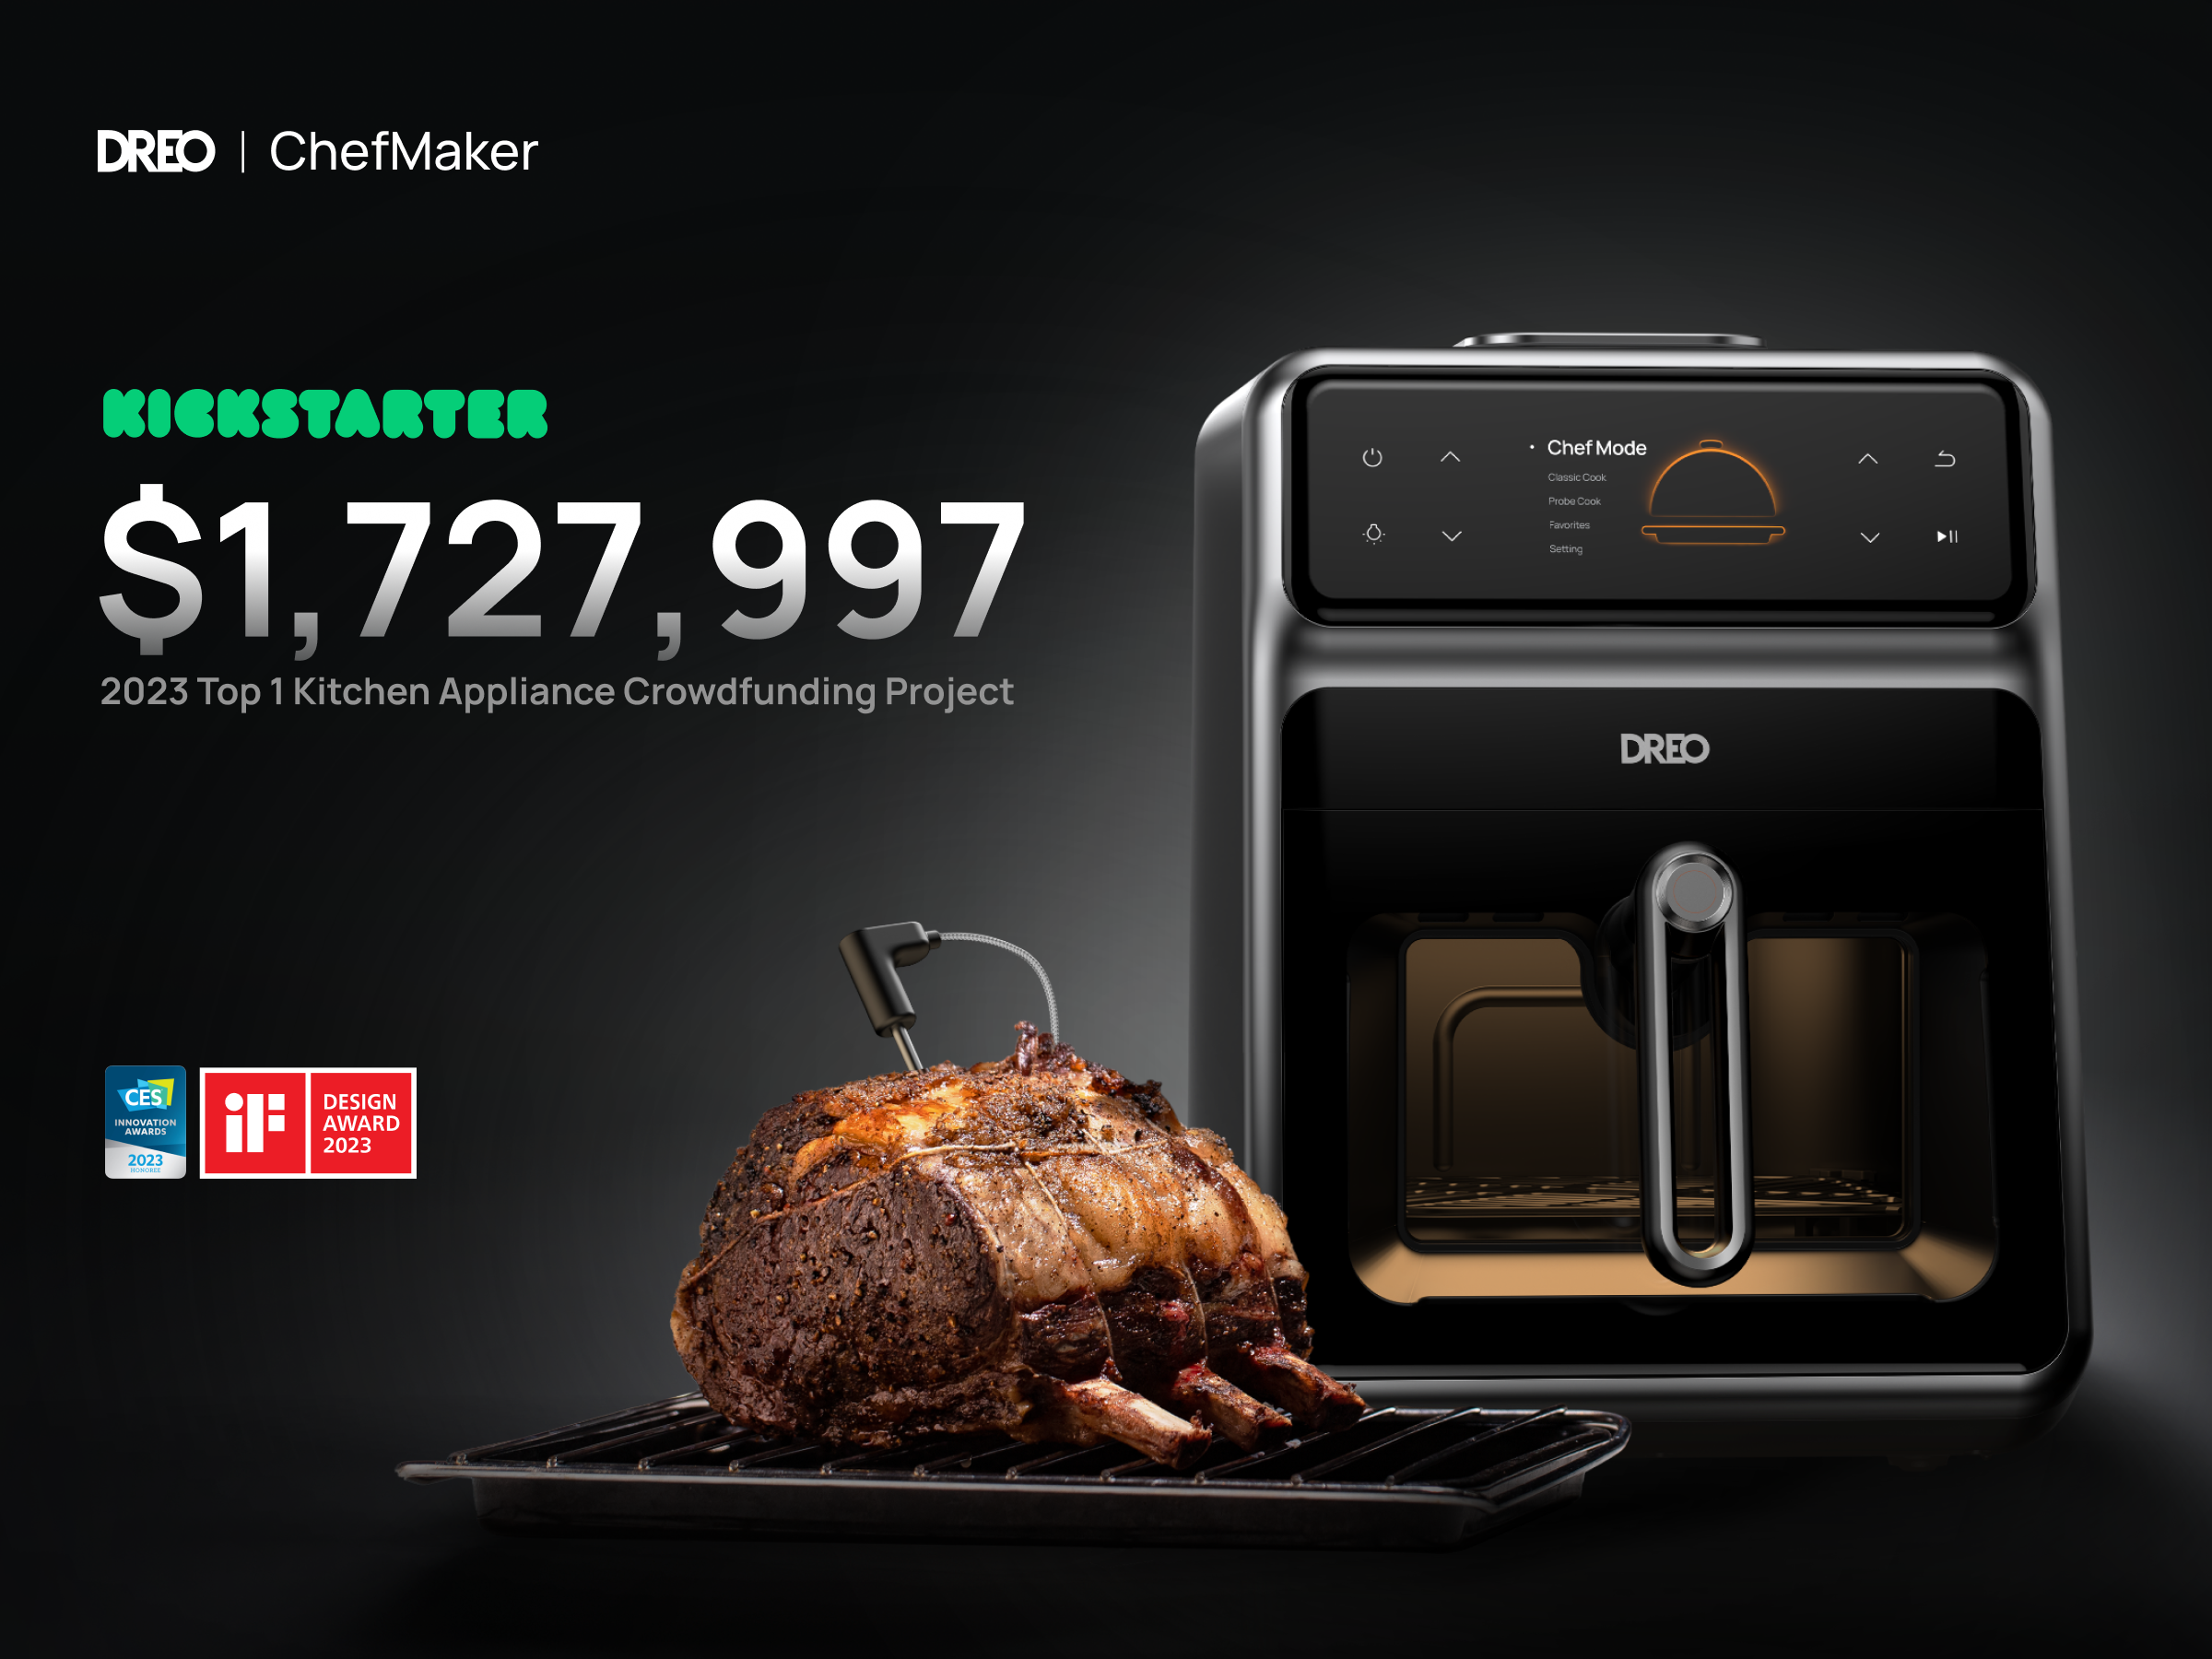  Dreo ChefMaker Combi Fryer, Cook like a pro with just